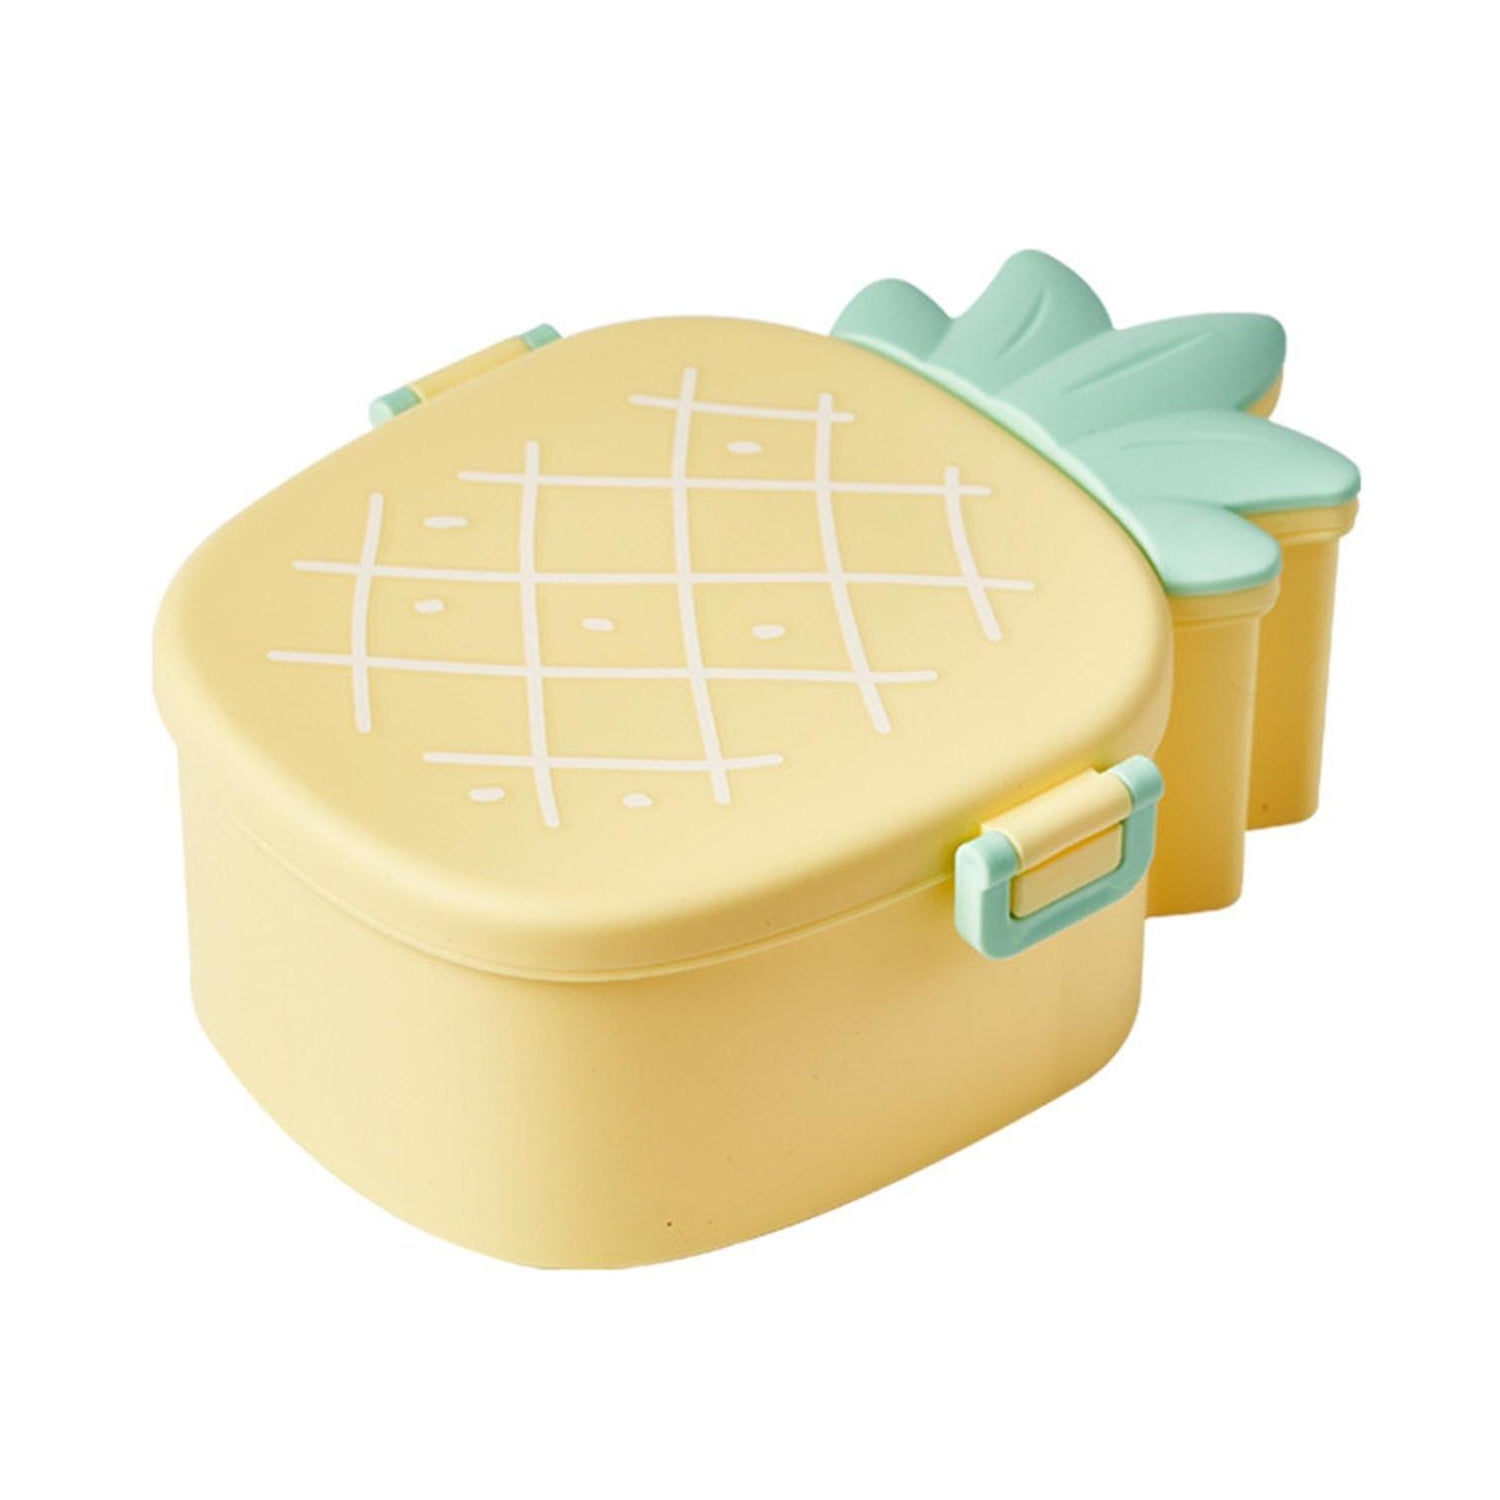 5729 Kids Lunch Box Cute Pineapple Shaped Bento Box with Fork Spoon Snack Candy Container Microwave Portable Office Lunch Box (1 Pc / With Spoon, Fork & Color Box)